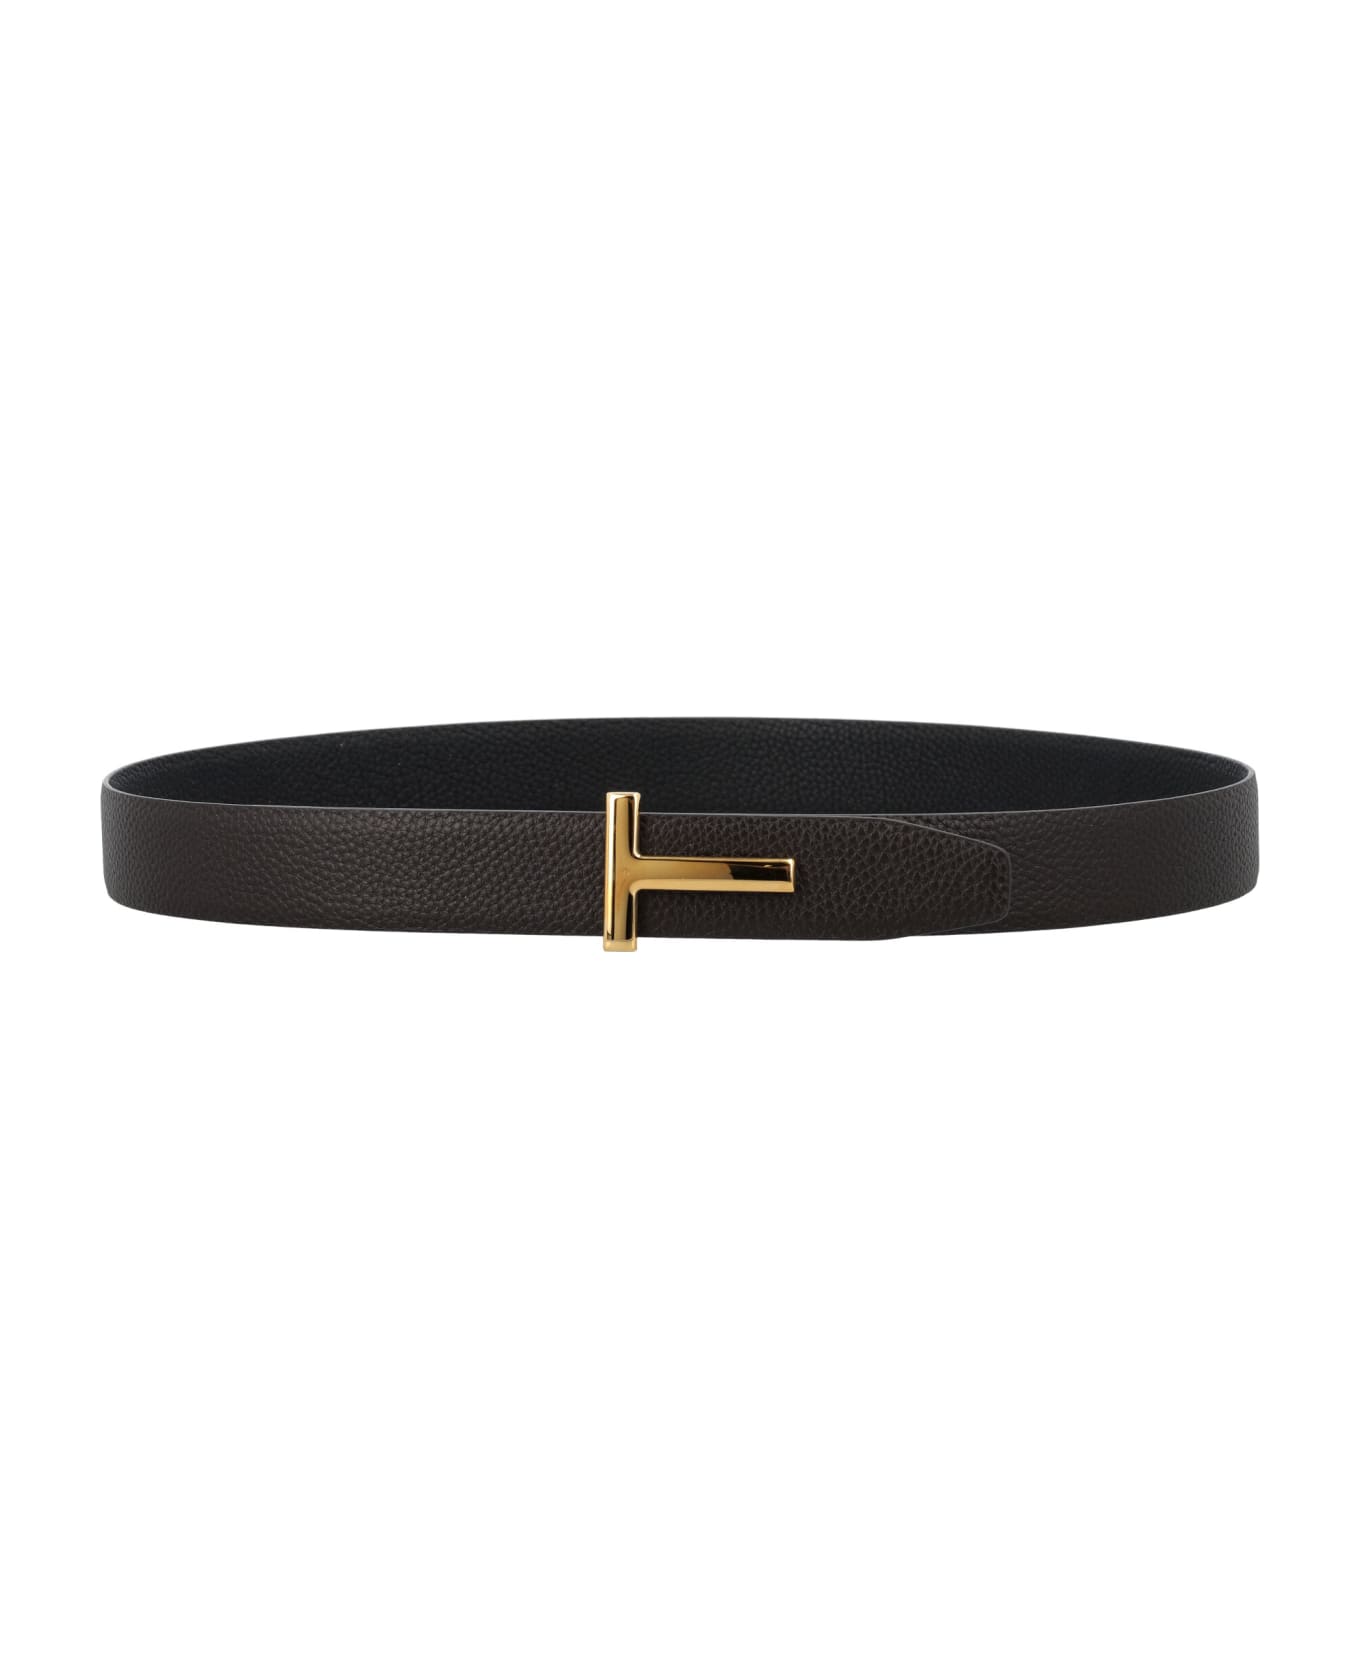 Tom Ford Small Grain Leather Icon Belt - BROWN BLACK